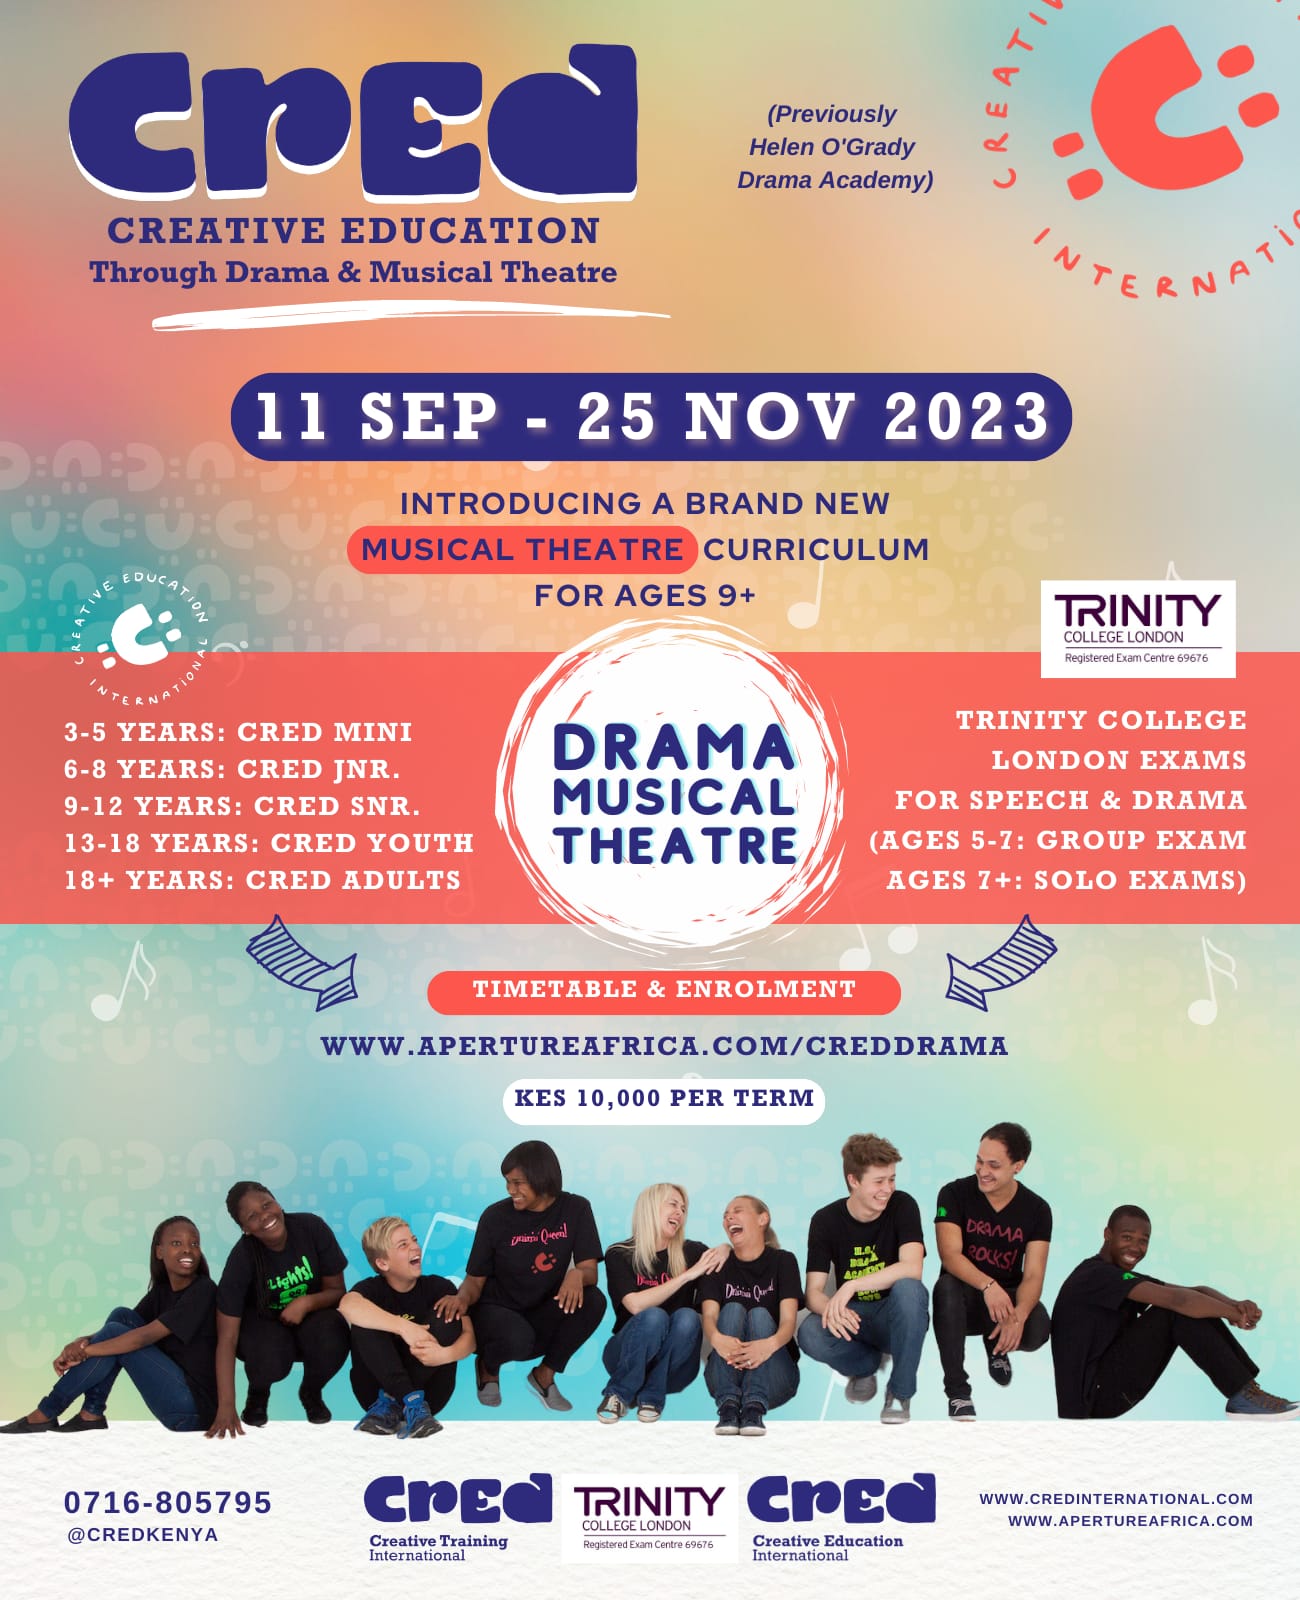 Creative Education in Drama, Music and Theatre